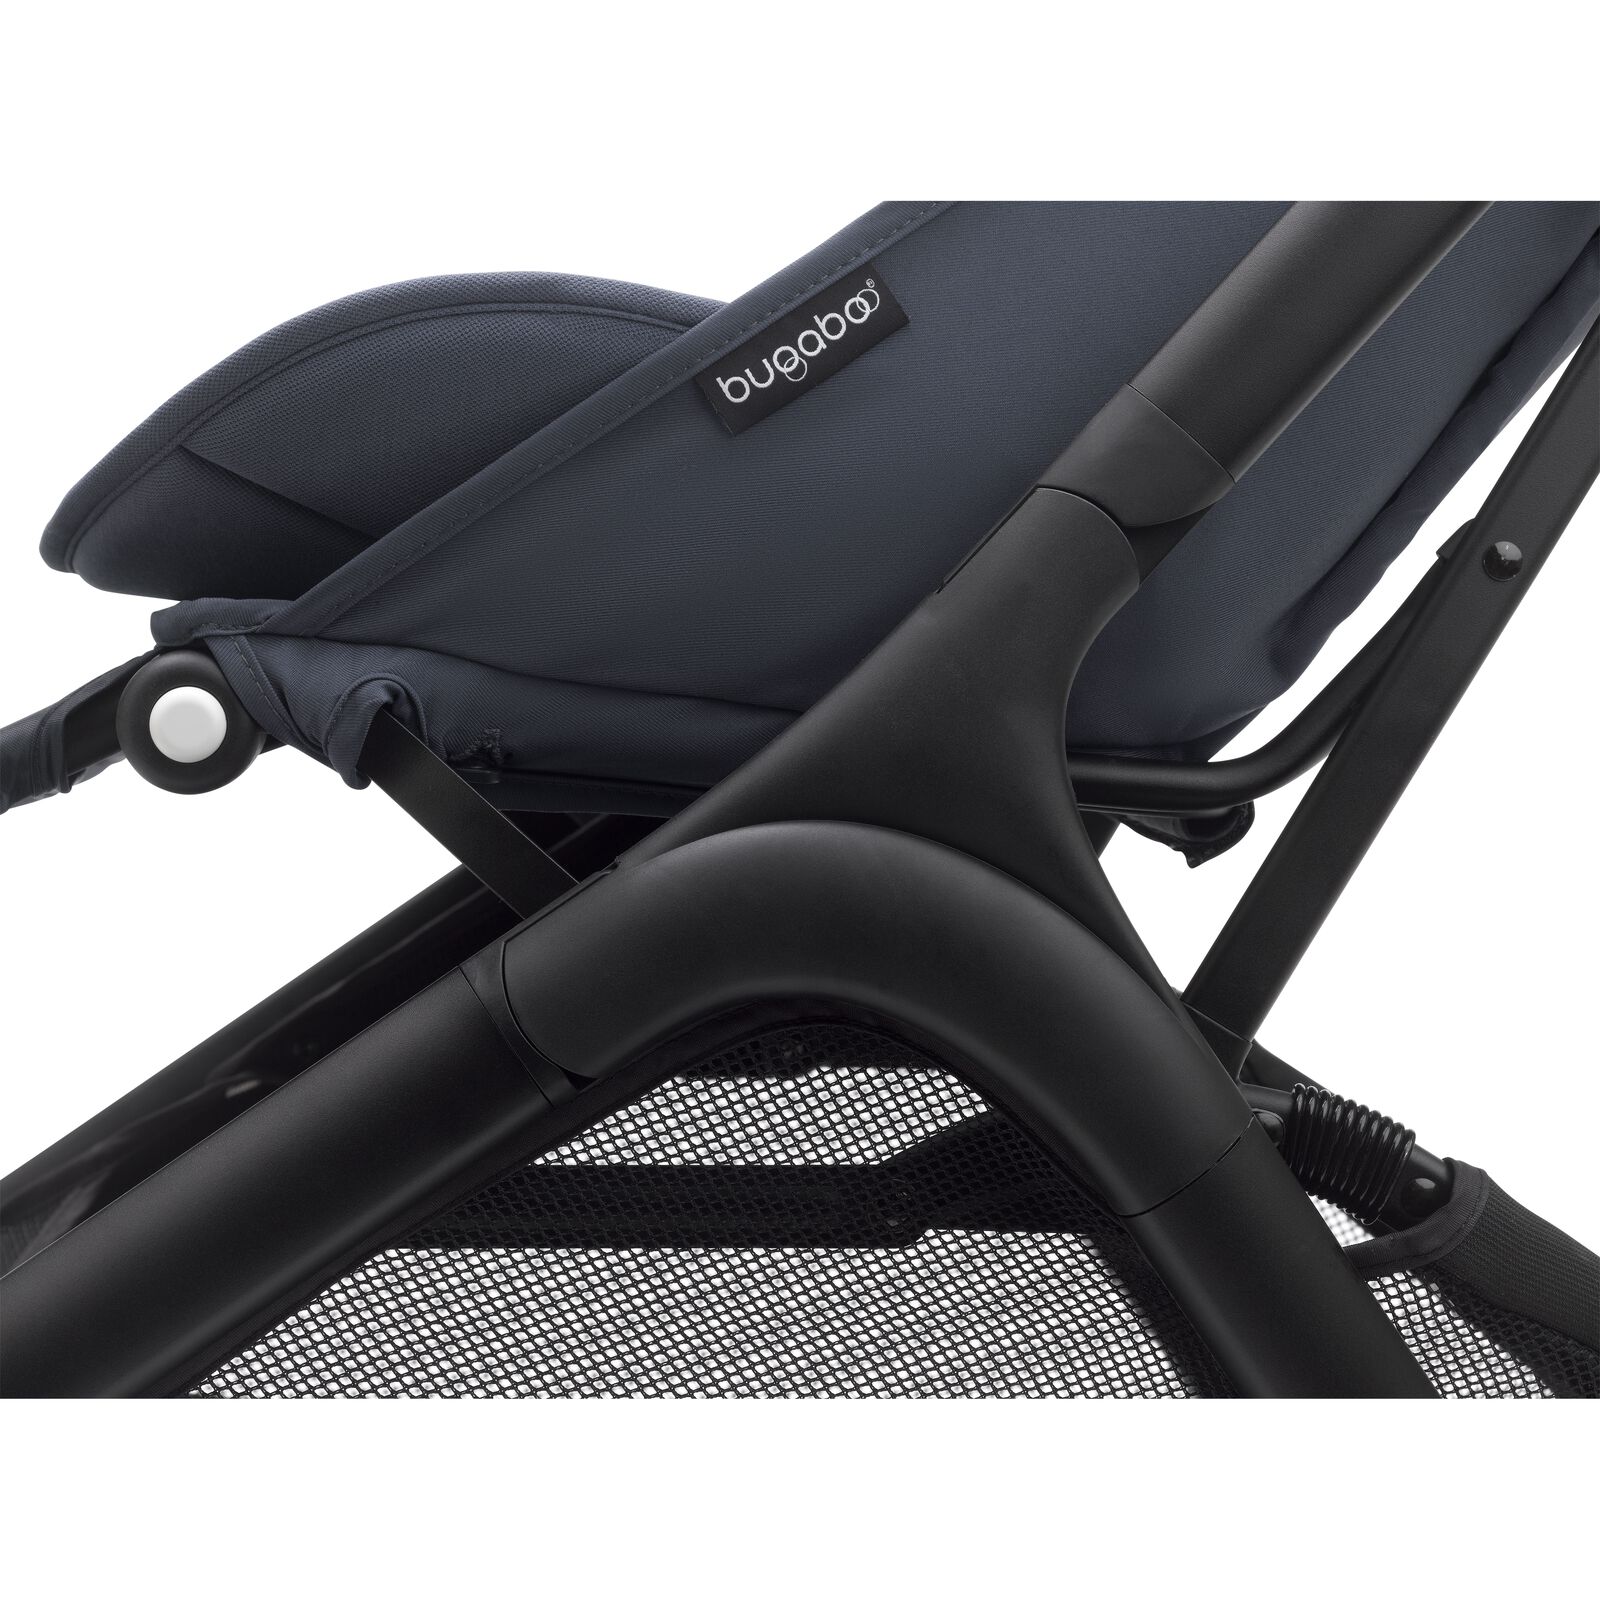 Bugaboo Butterfly seat pram - View 12